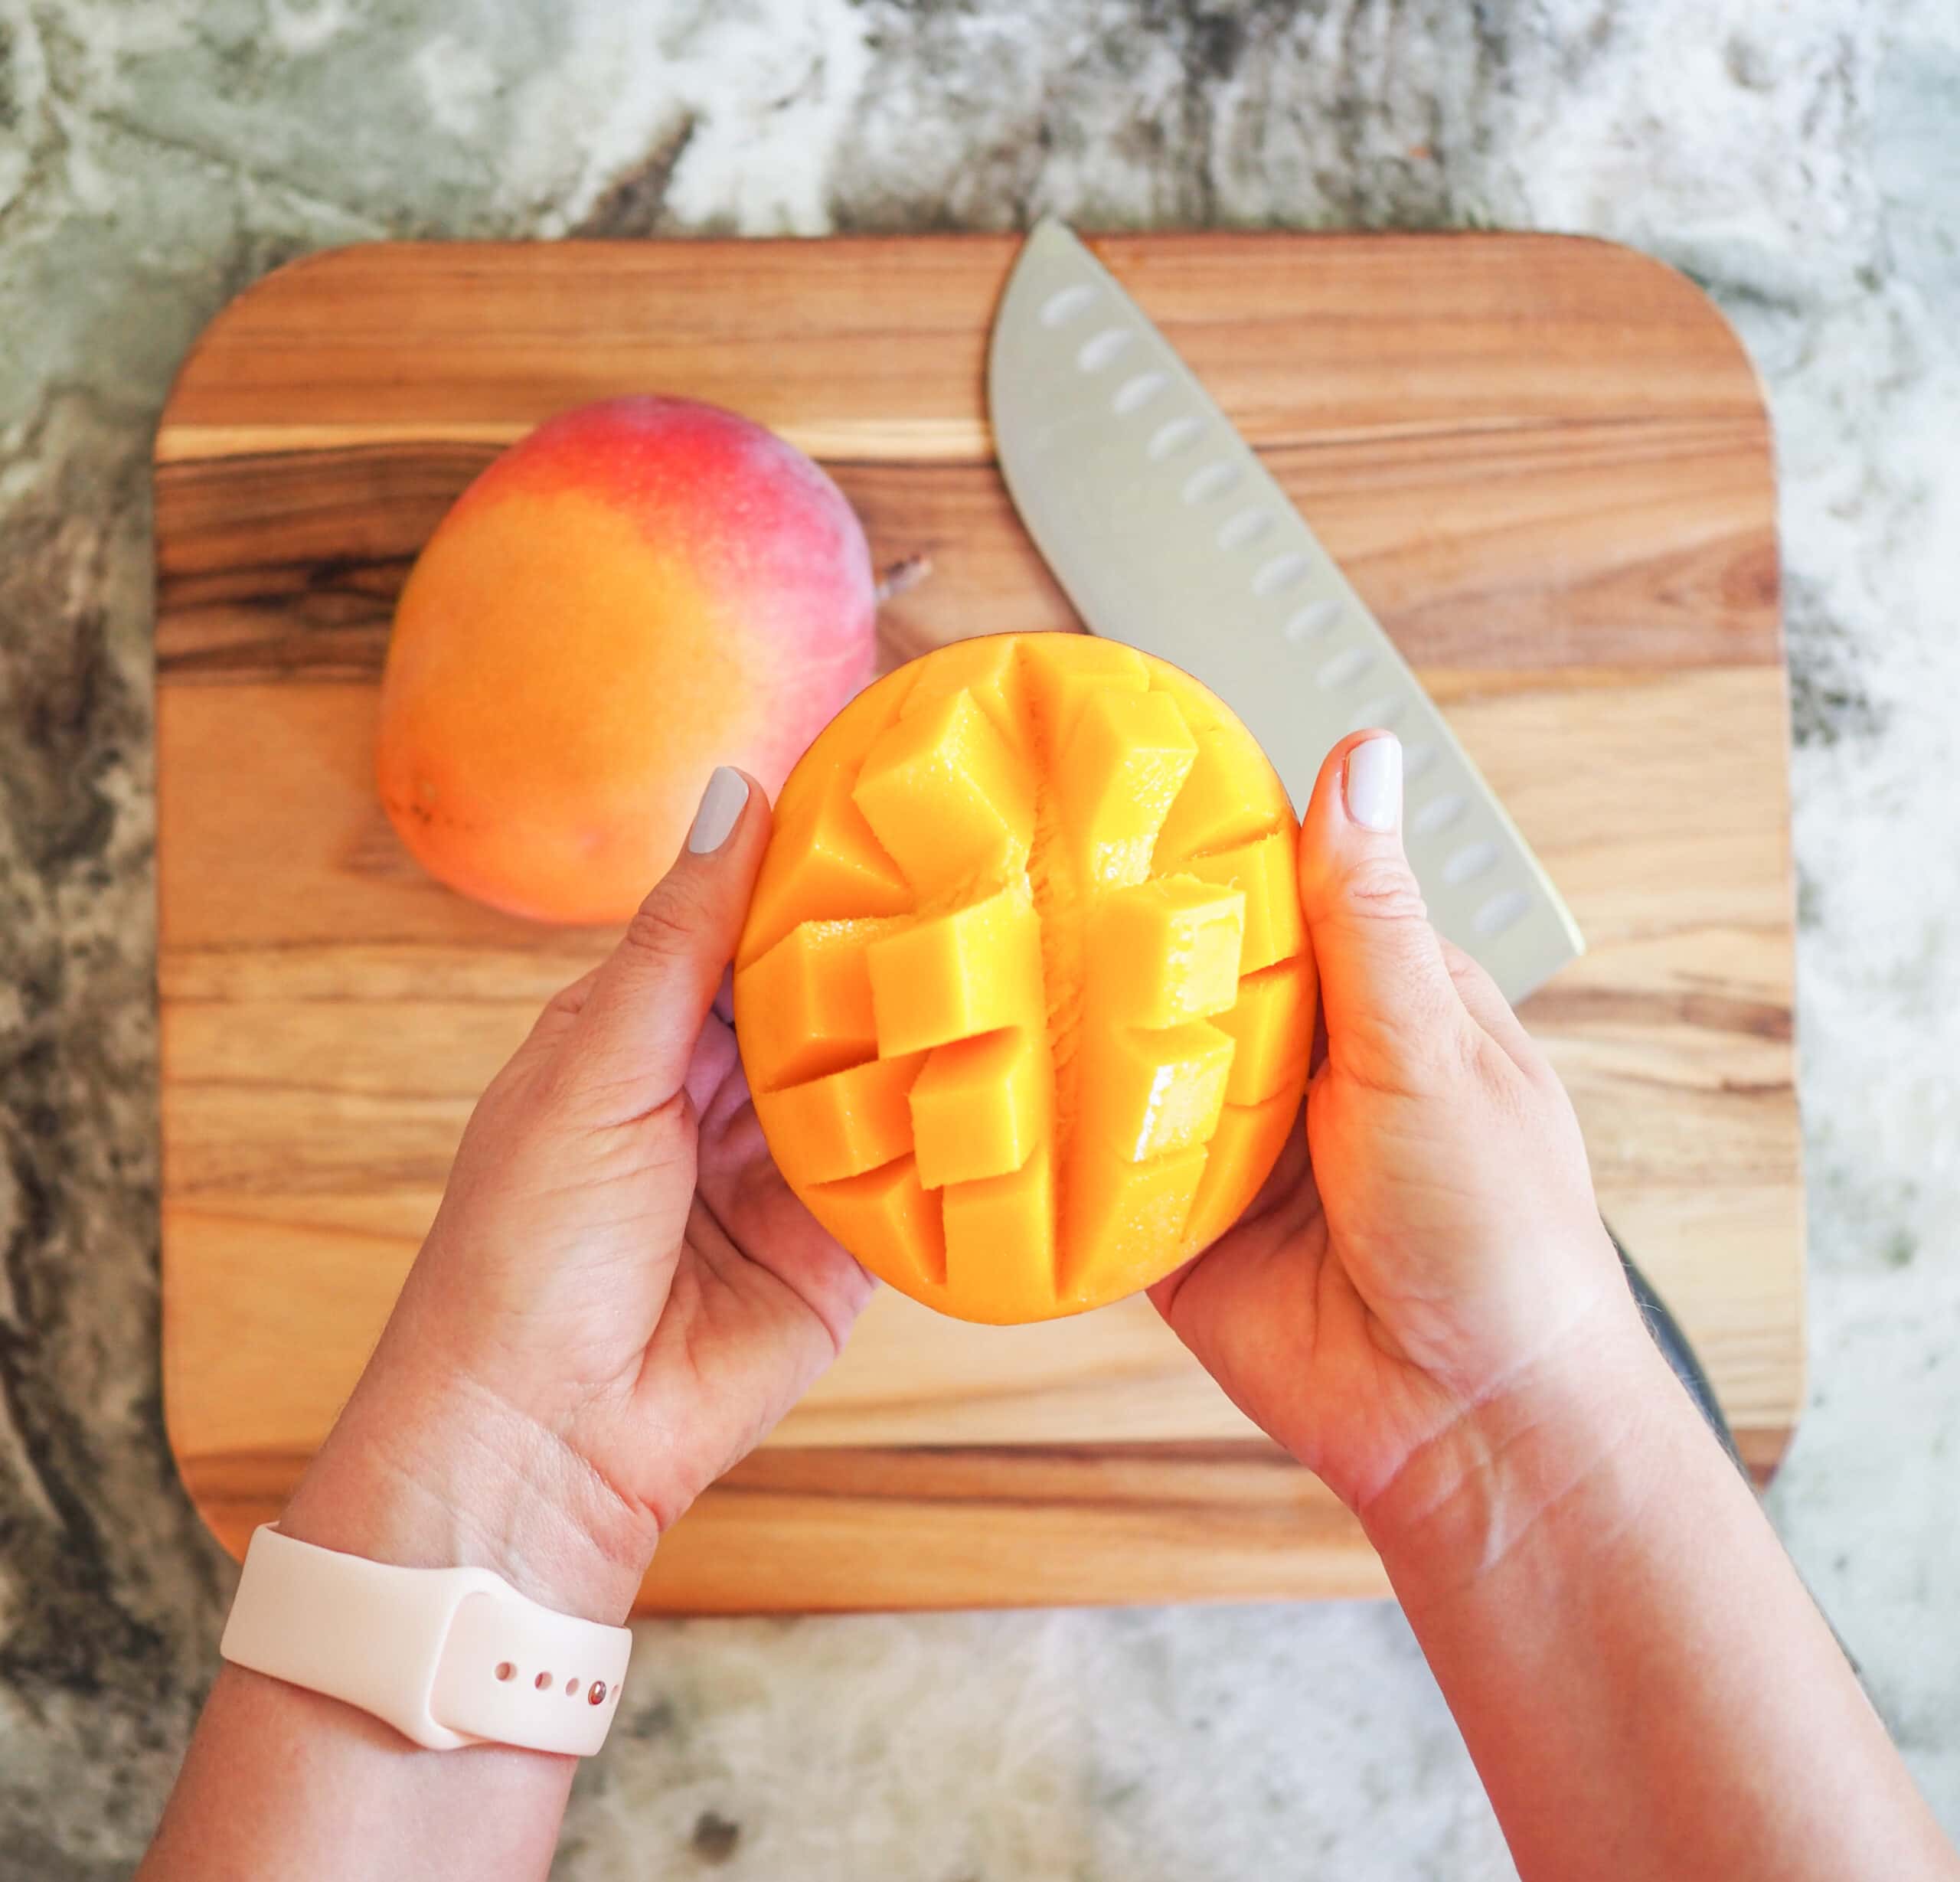 How To Cut A Mango Step By Step Photos The Travel Bite,How Much Do Horses Cost To Buy